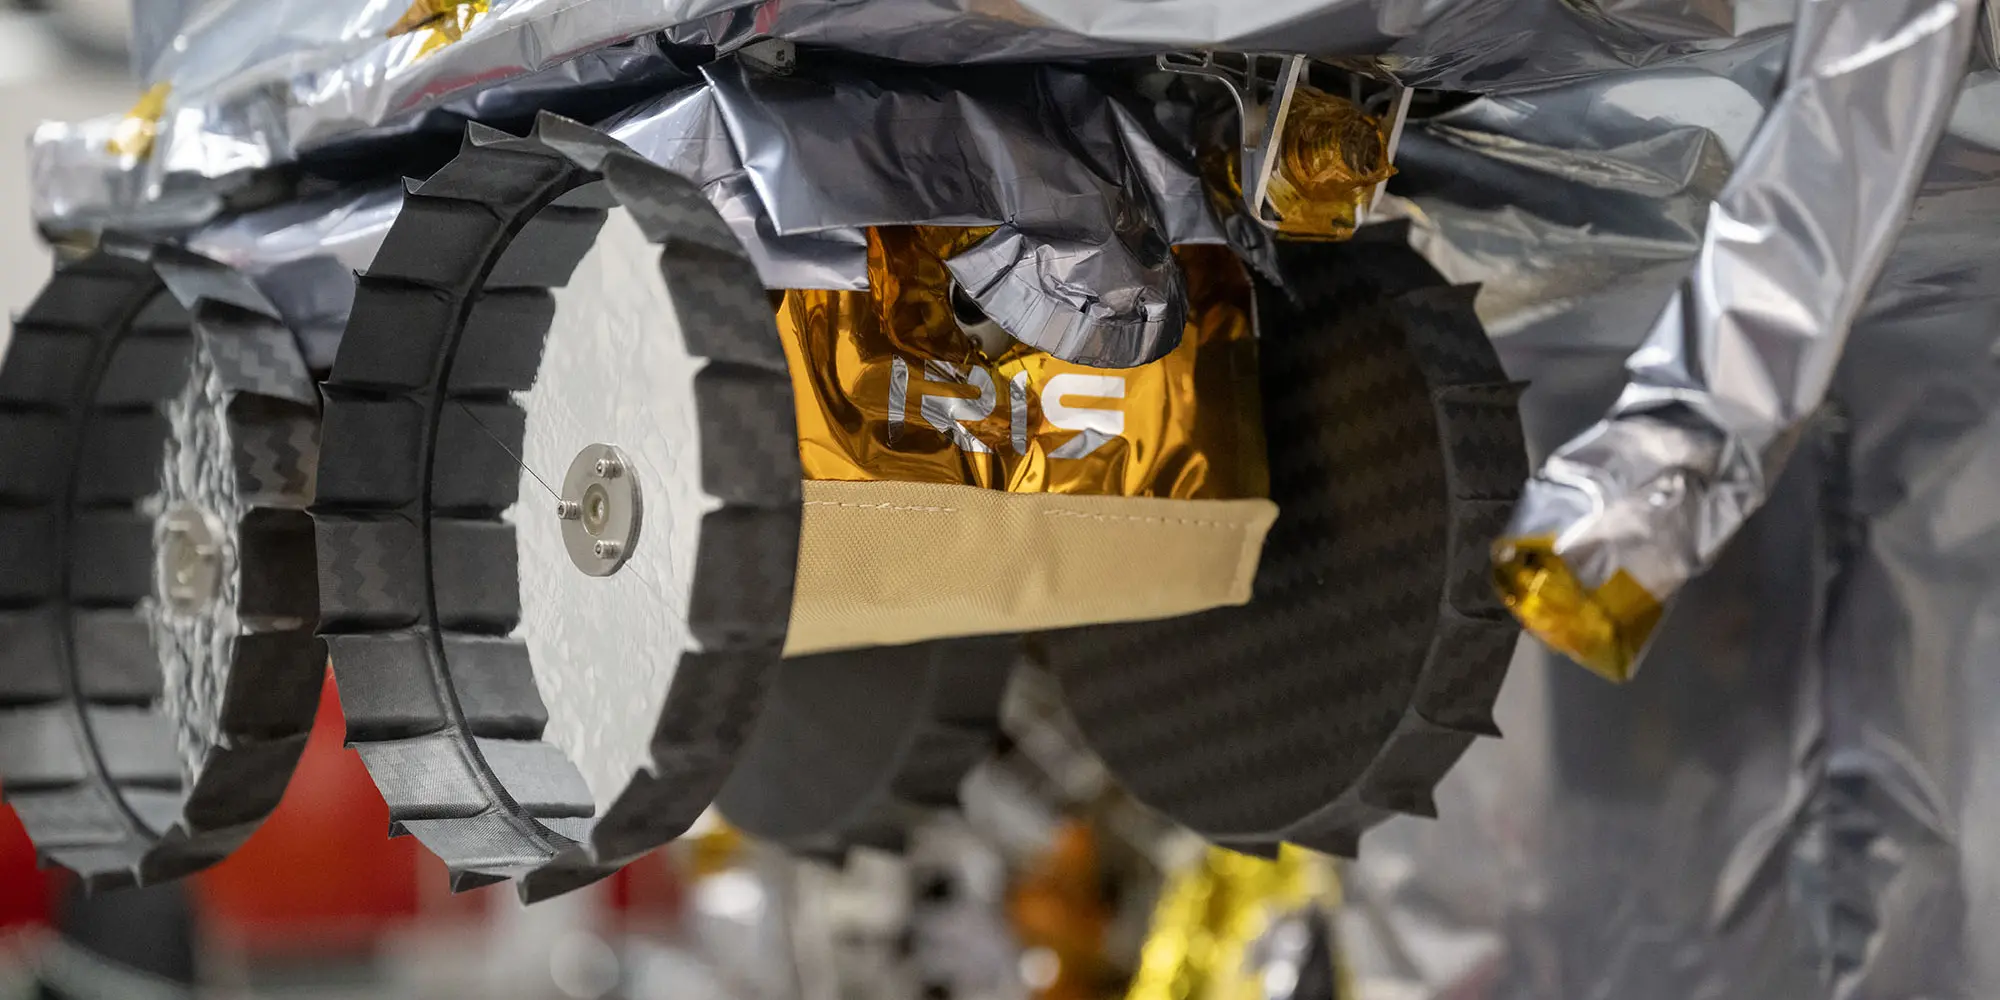 CMU’s Iris rover sits secured to the Peregrine Lunar Lander inside a clean room at Astrobotic’s headquarters in Pittsburgh.